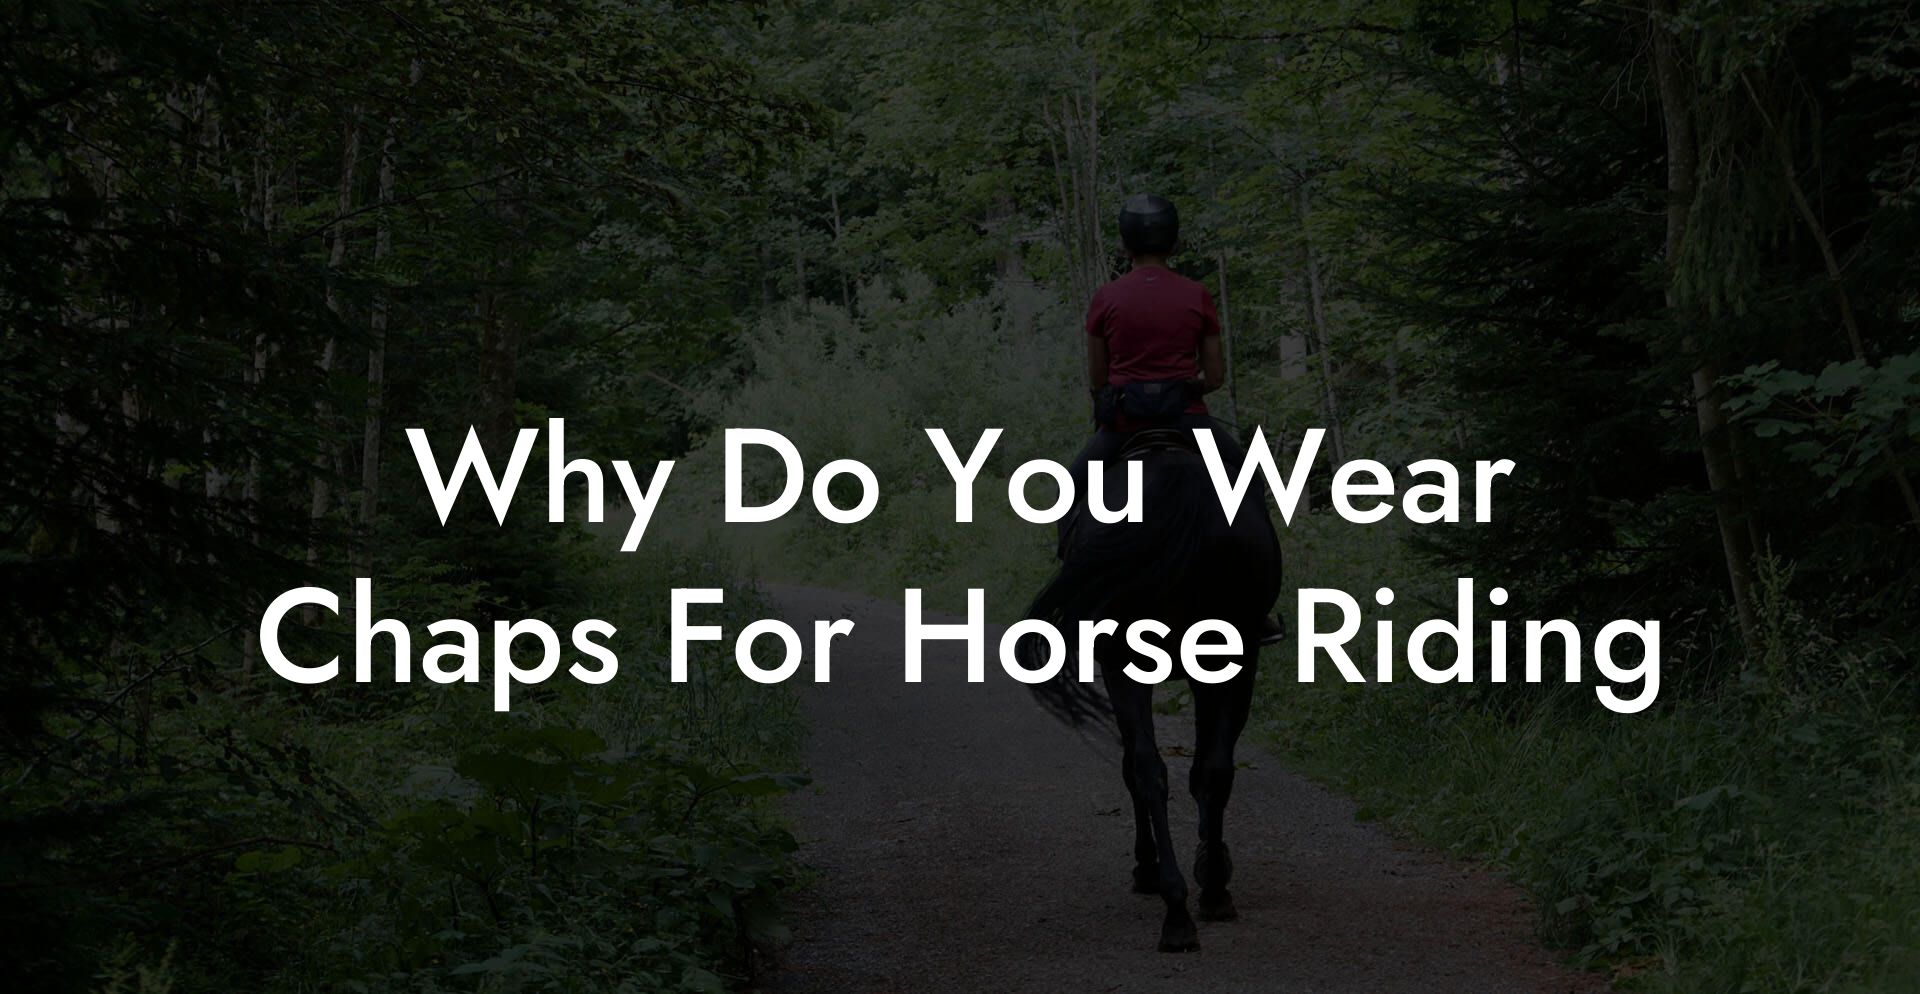 Why Do You Wear Chaps For Horse Riding